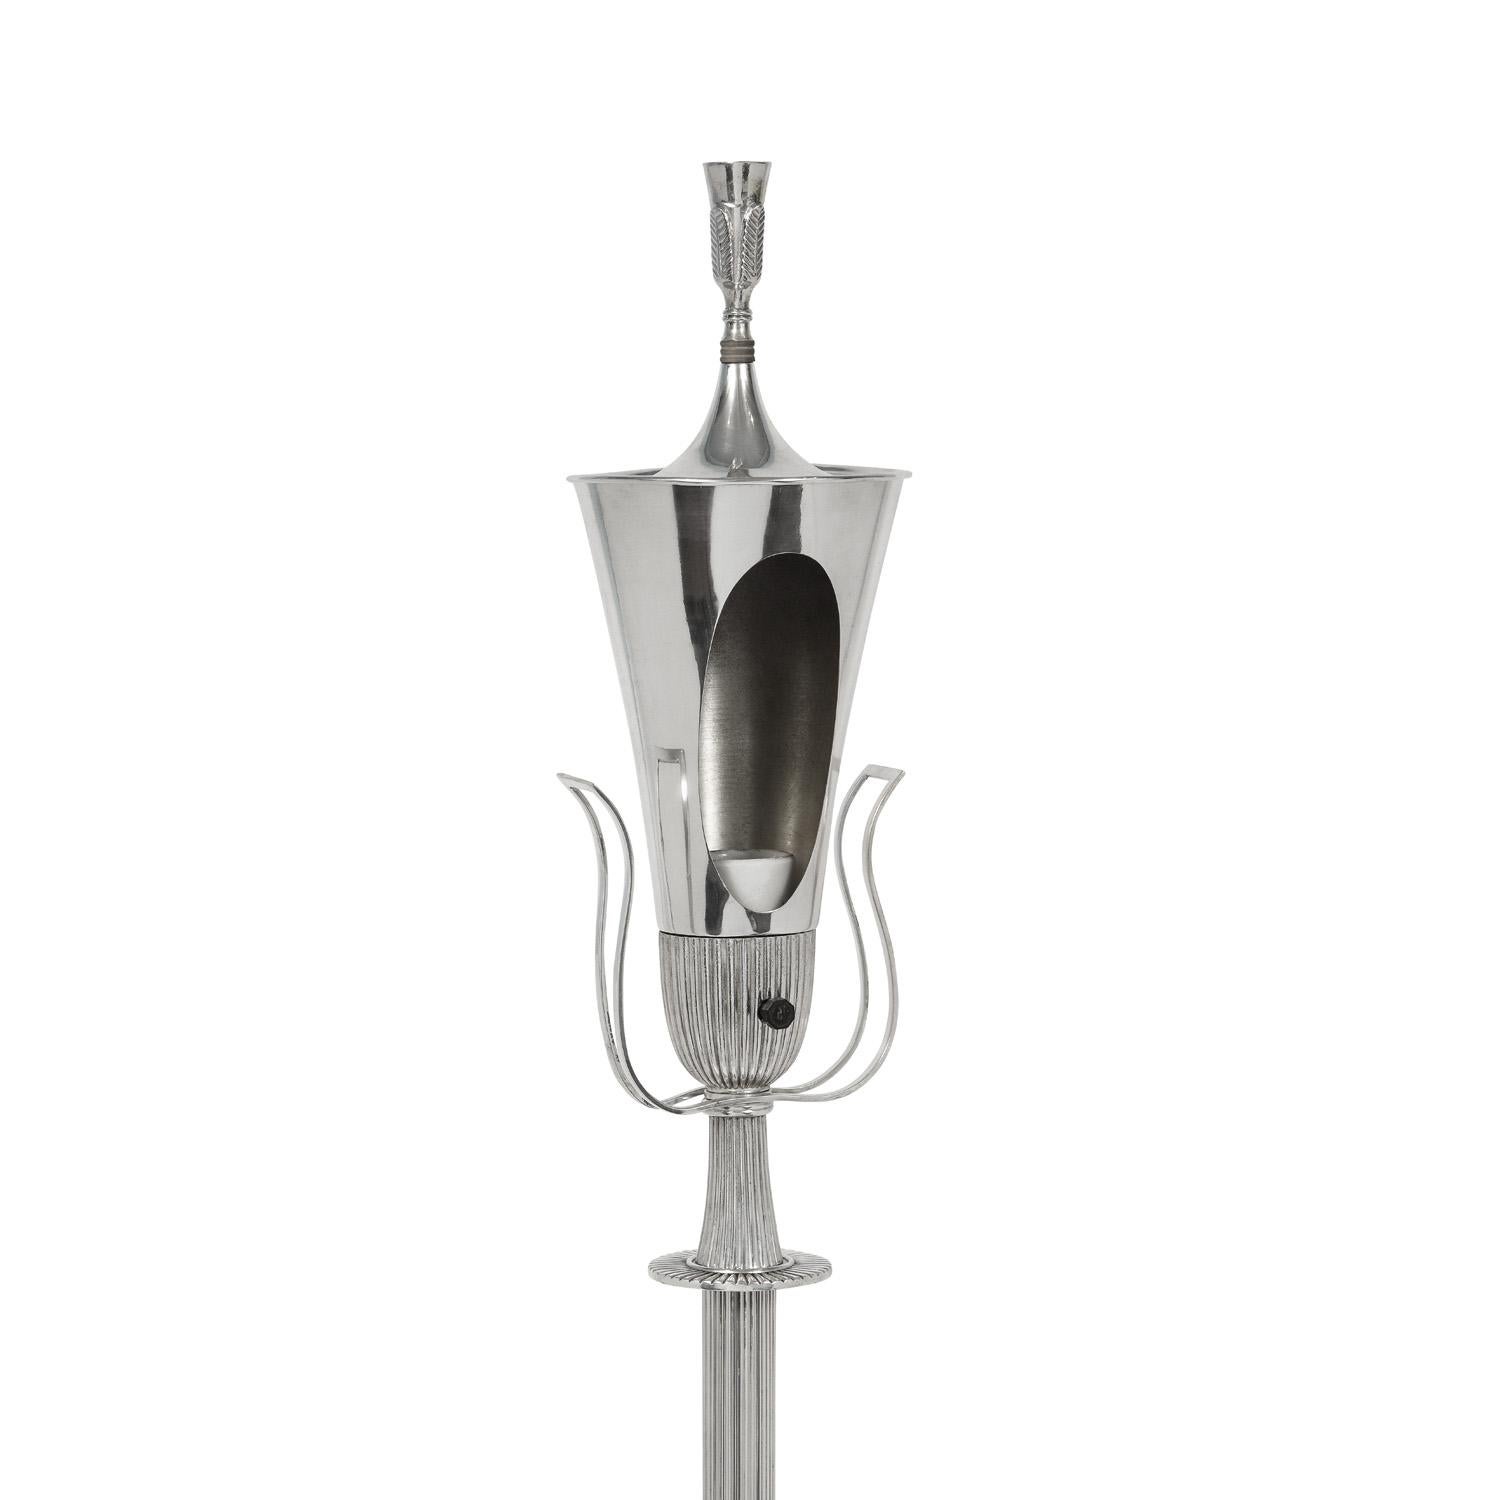 North American Tommi Parzinger Torchere in Polished Nickel, 1950s For Sale